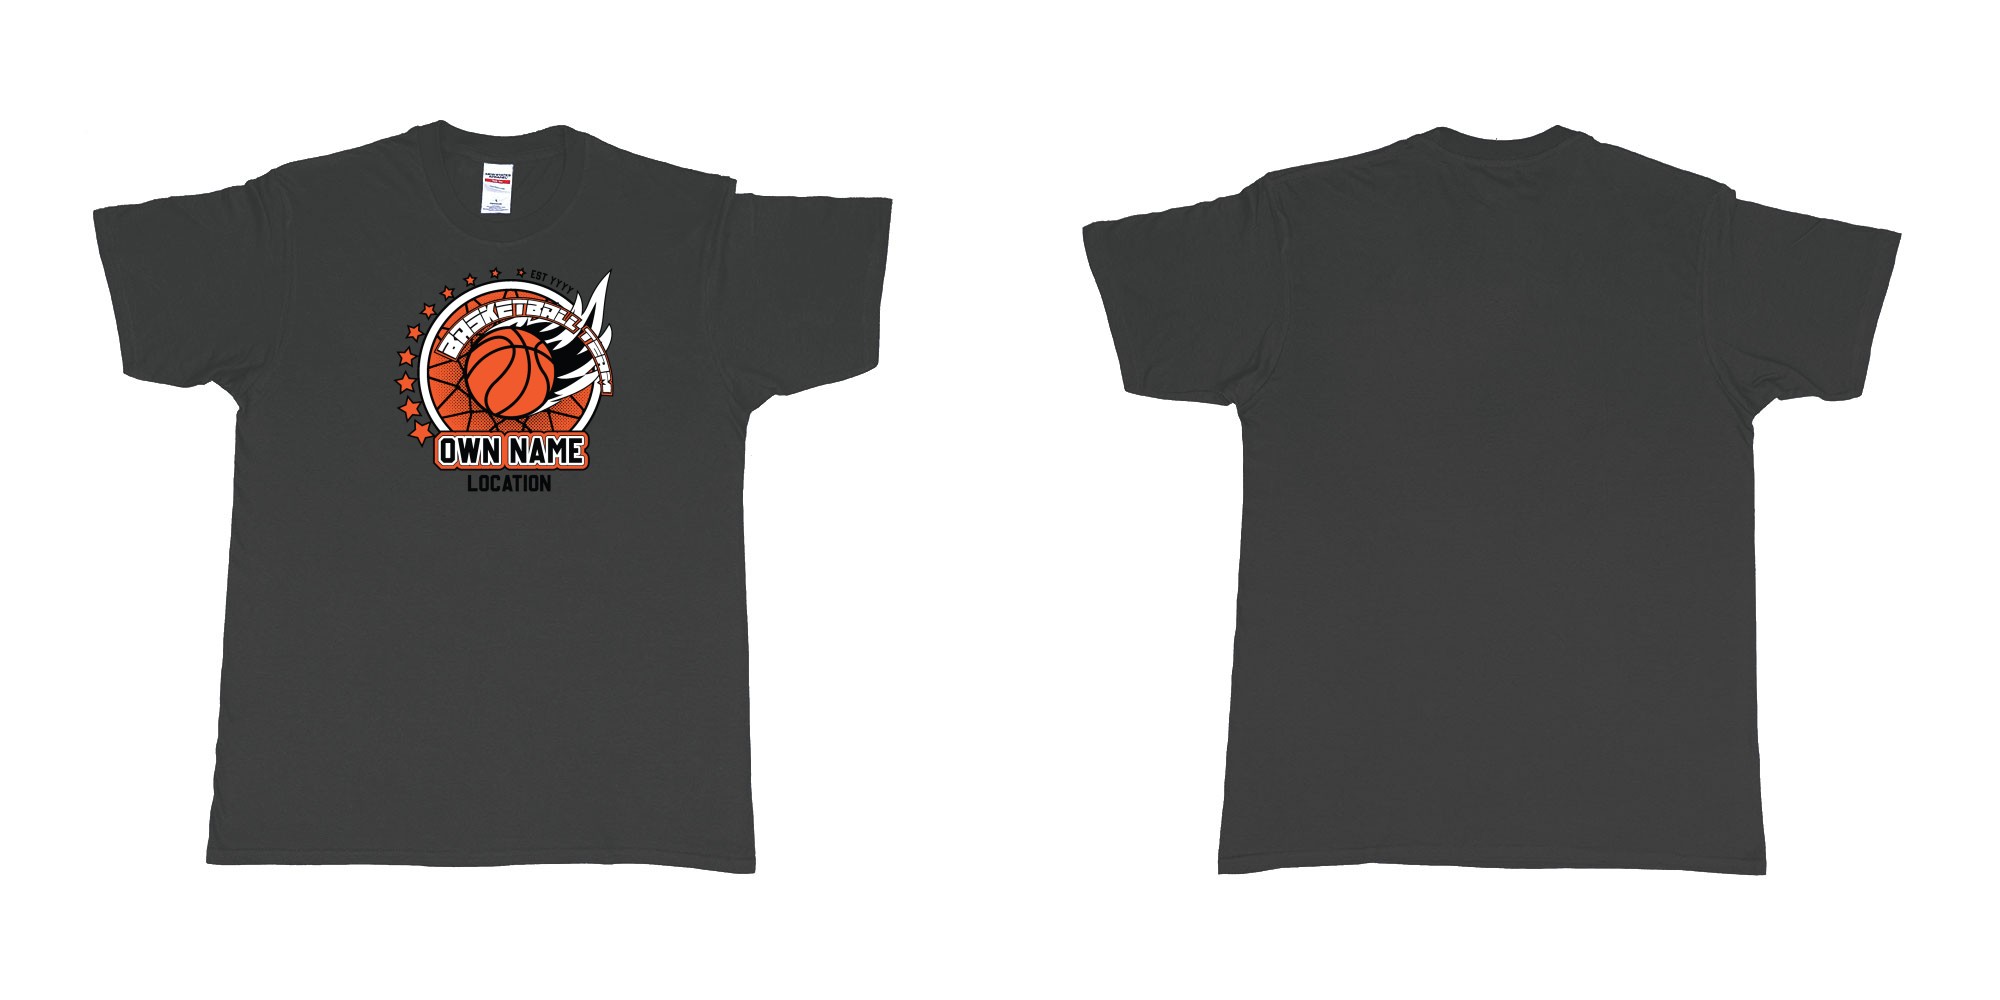 Custom tshirt design basketball team own name location established year custom design production bali in fabric color black choice your own text made in Bali by The Pirate Way